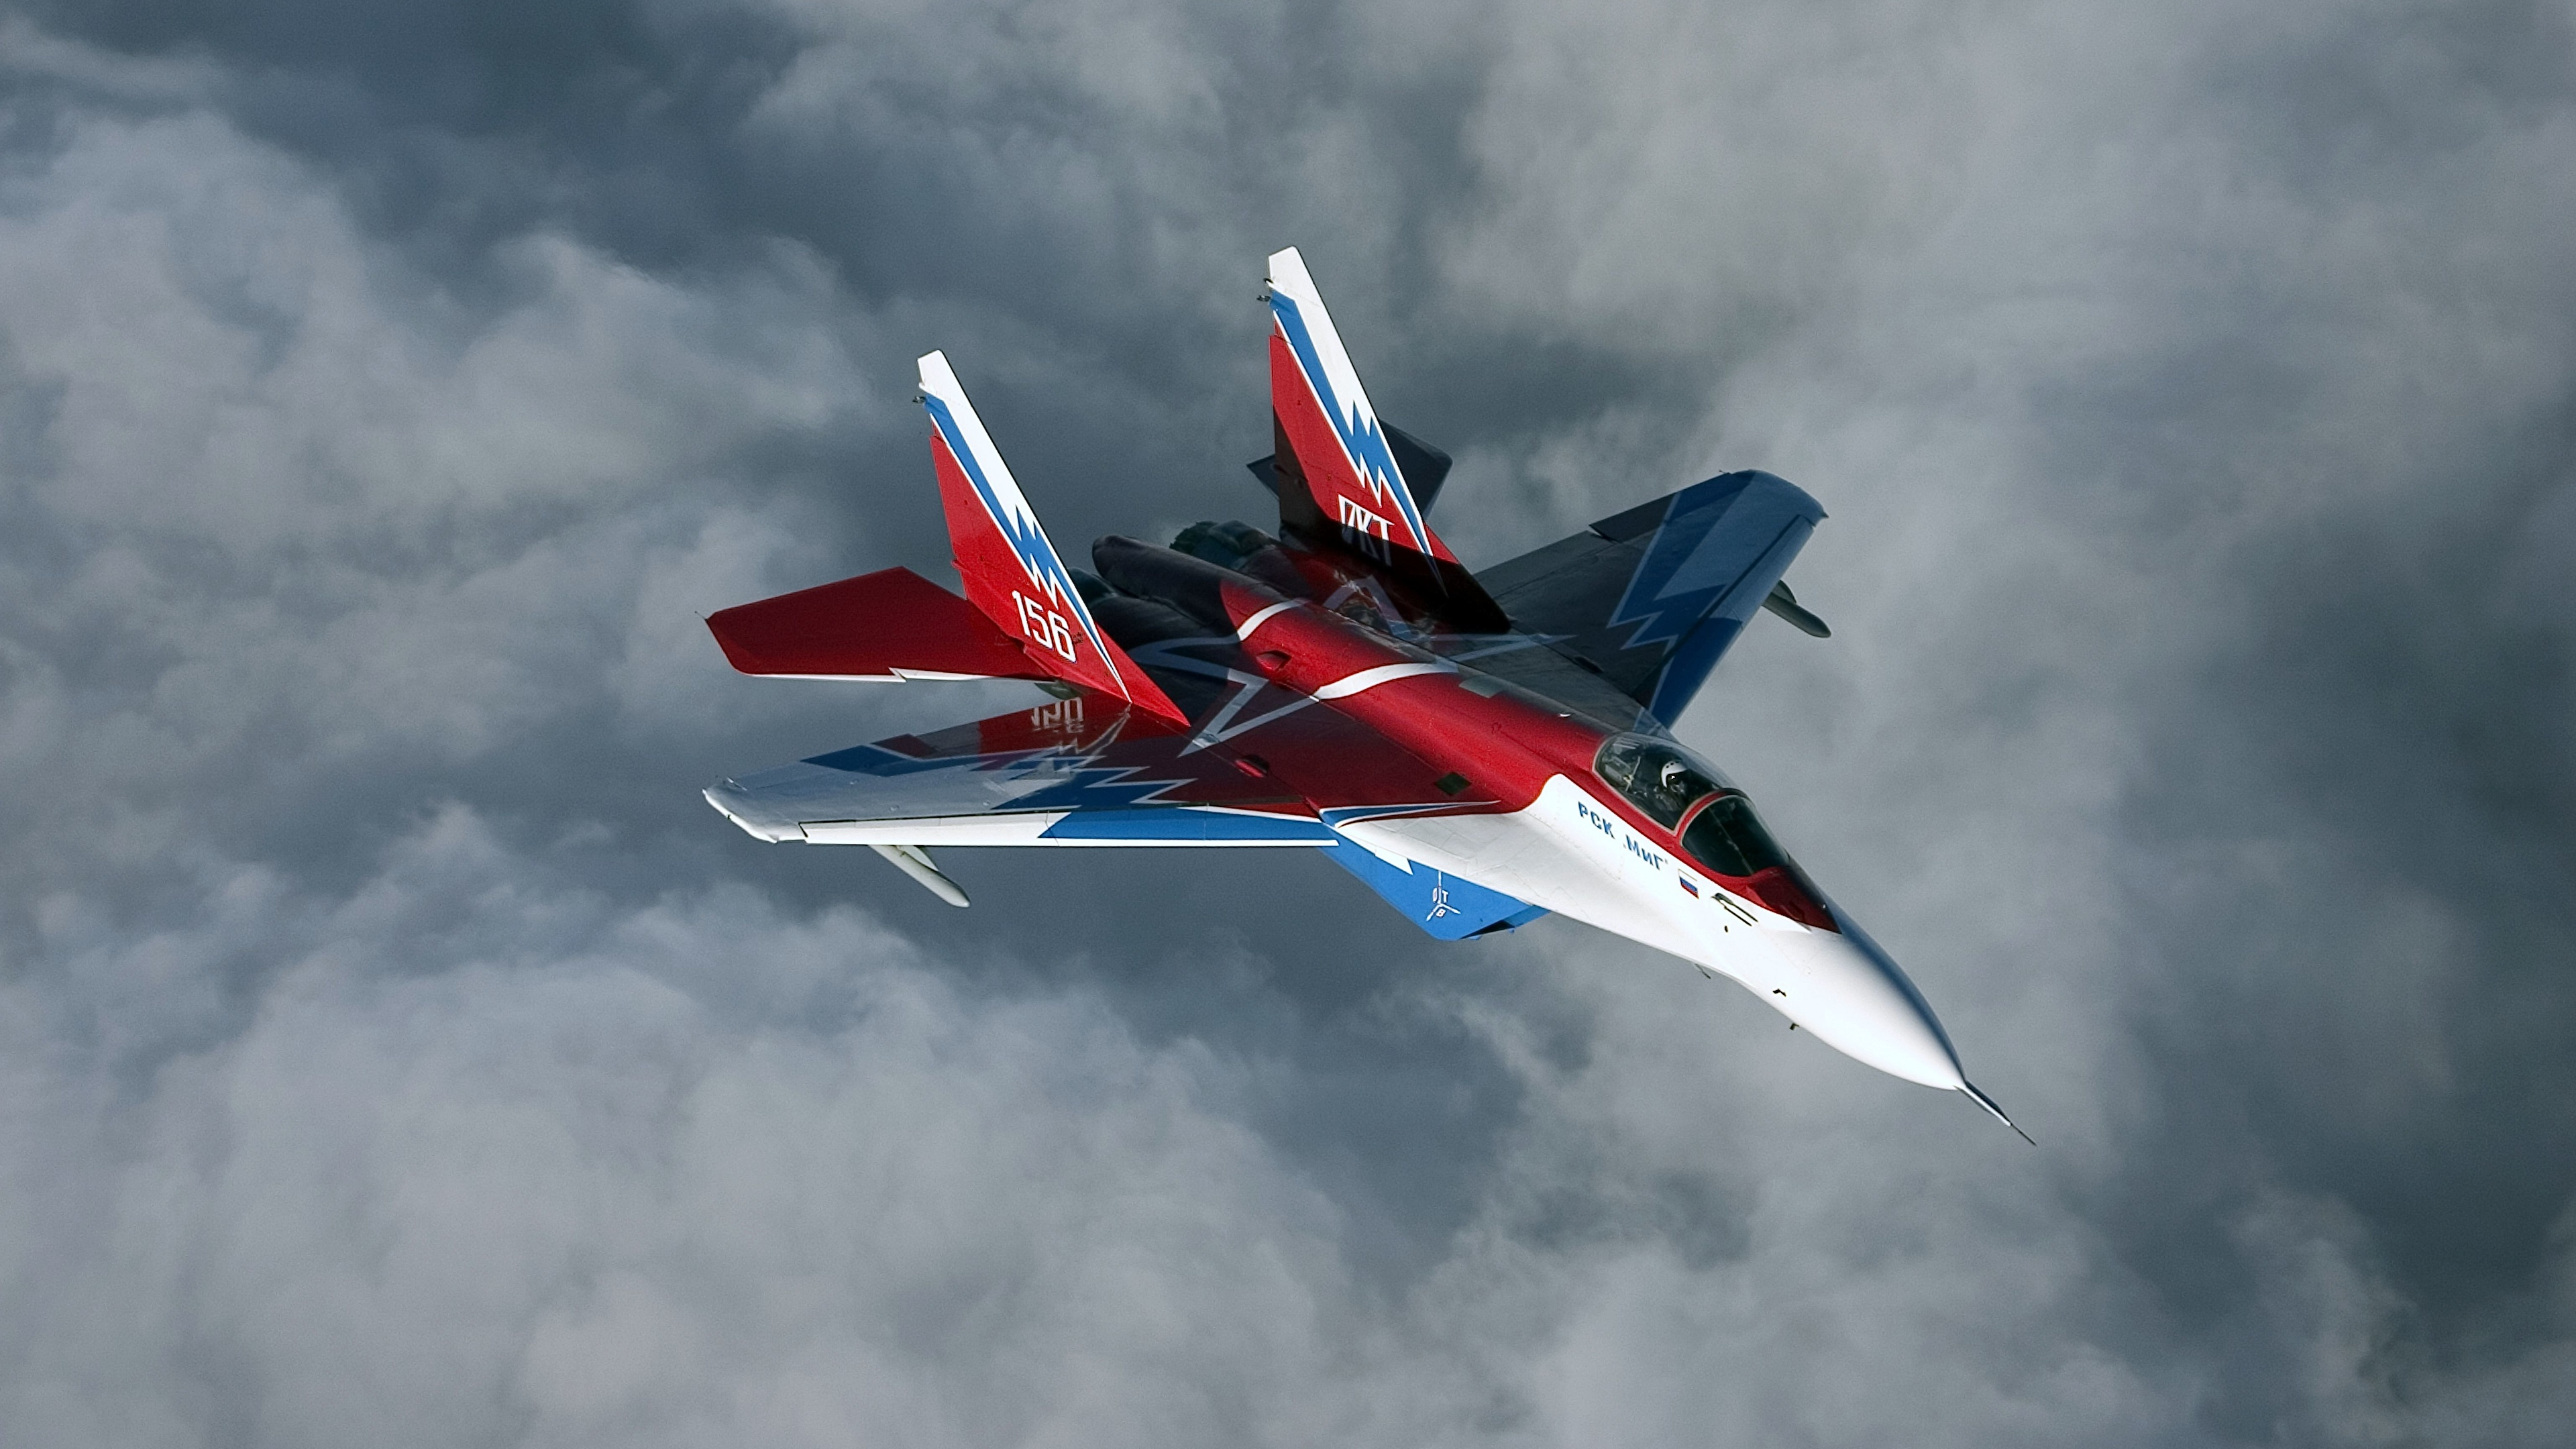 Red and White Jet Plane in Mid Air. Wallpaper in 3840x2160 Resolution